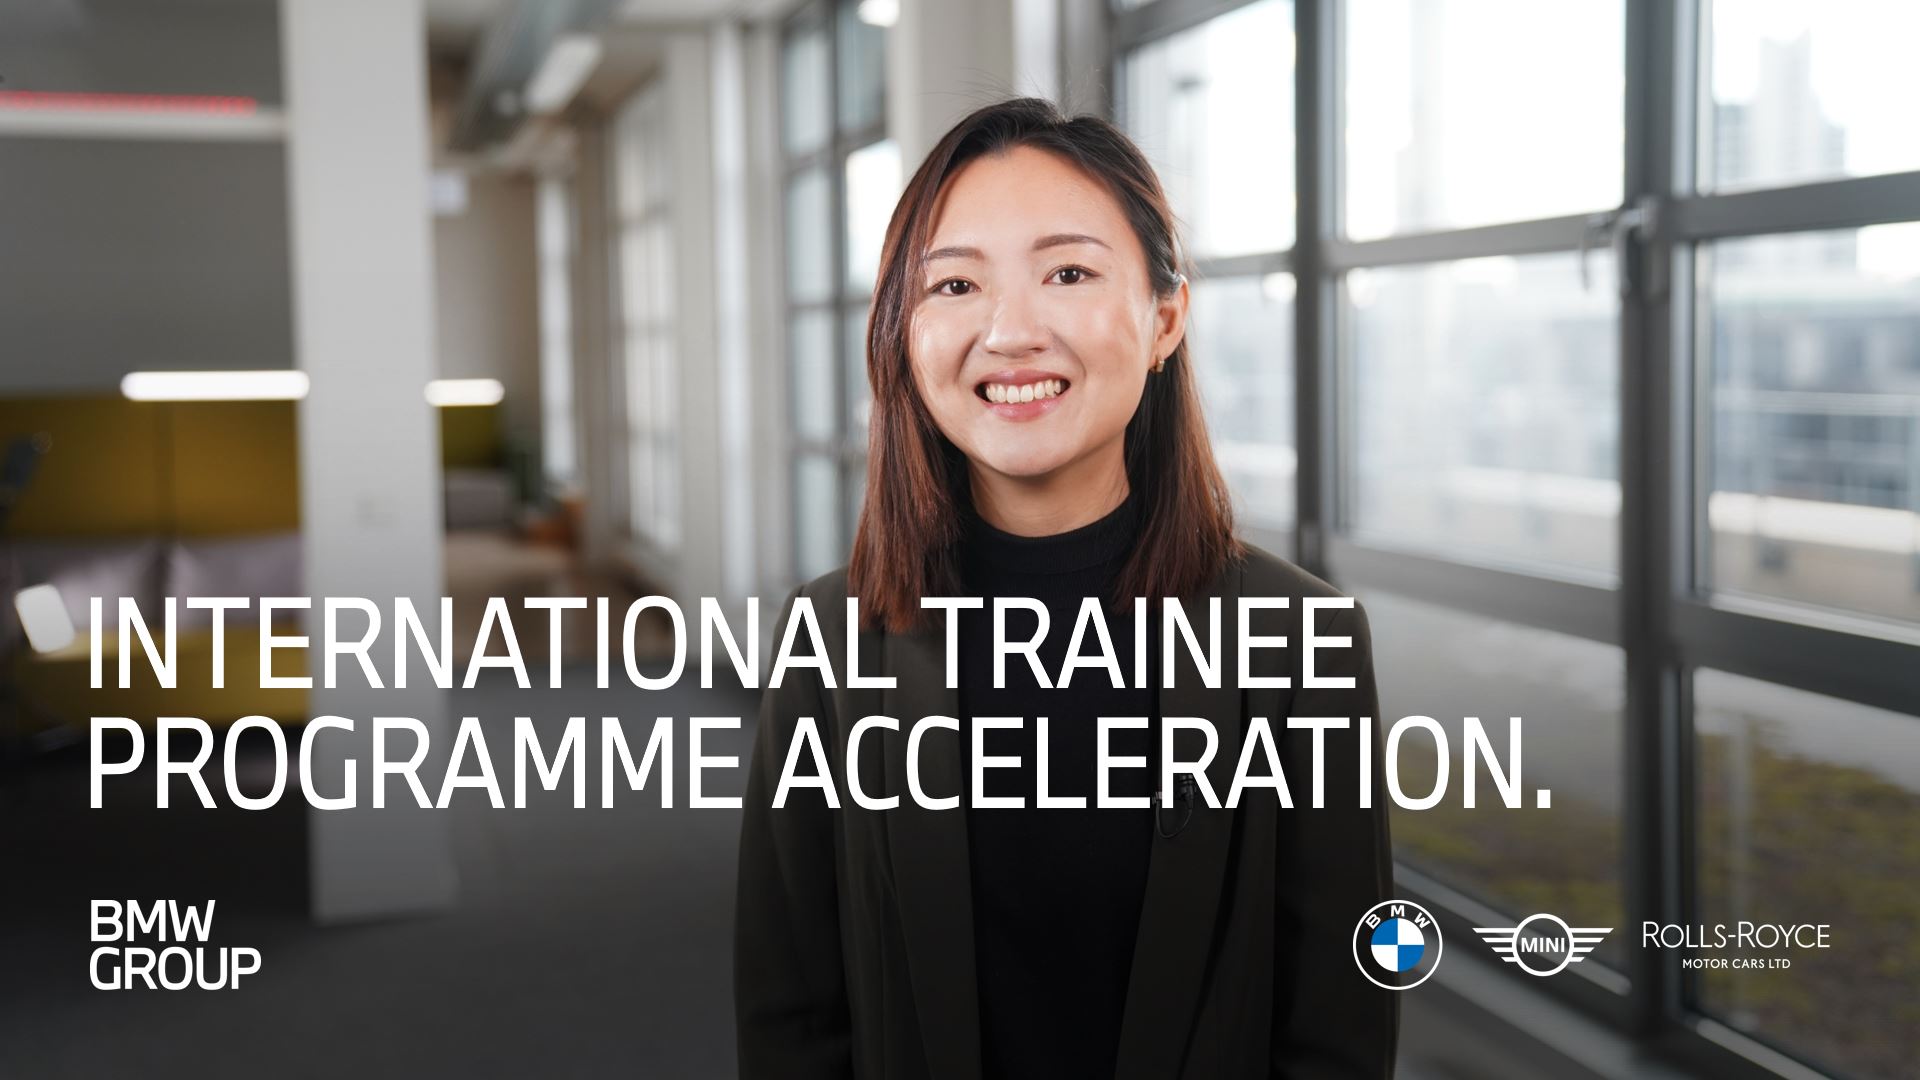 The BMW Group Trainee Programme AccelertiON.